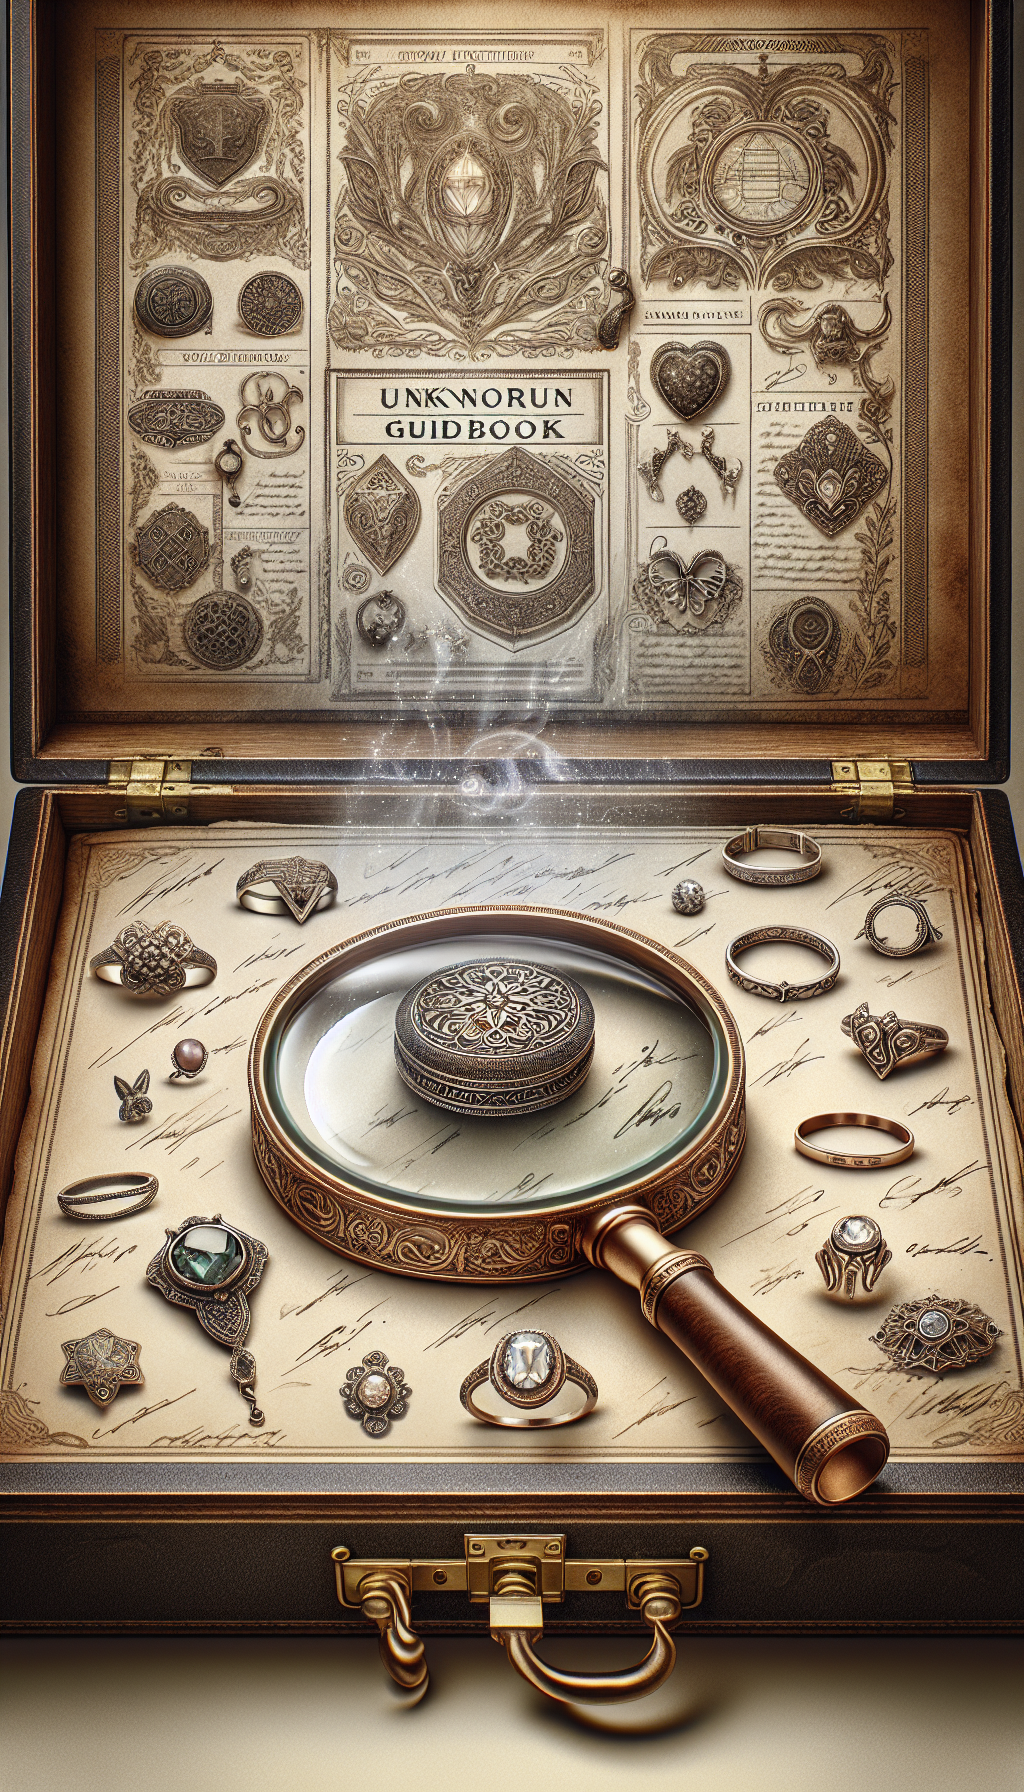 An ornate magnifying glass hovers over an open, antique jewelry box, revealing glinting signature marks of renowned jewelers on vintage rings, necklaces, and brooches, each styled distinctly to reflect its creator's era. Intricate engravings transform into a whimsical guidebook's pages bordering the scene, leading the eye on a visual quest for identifying historic treasures.